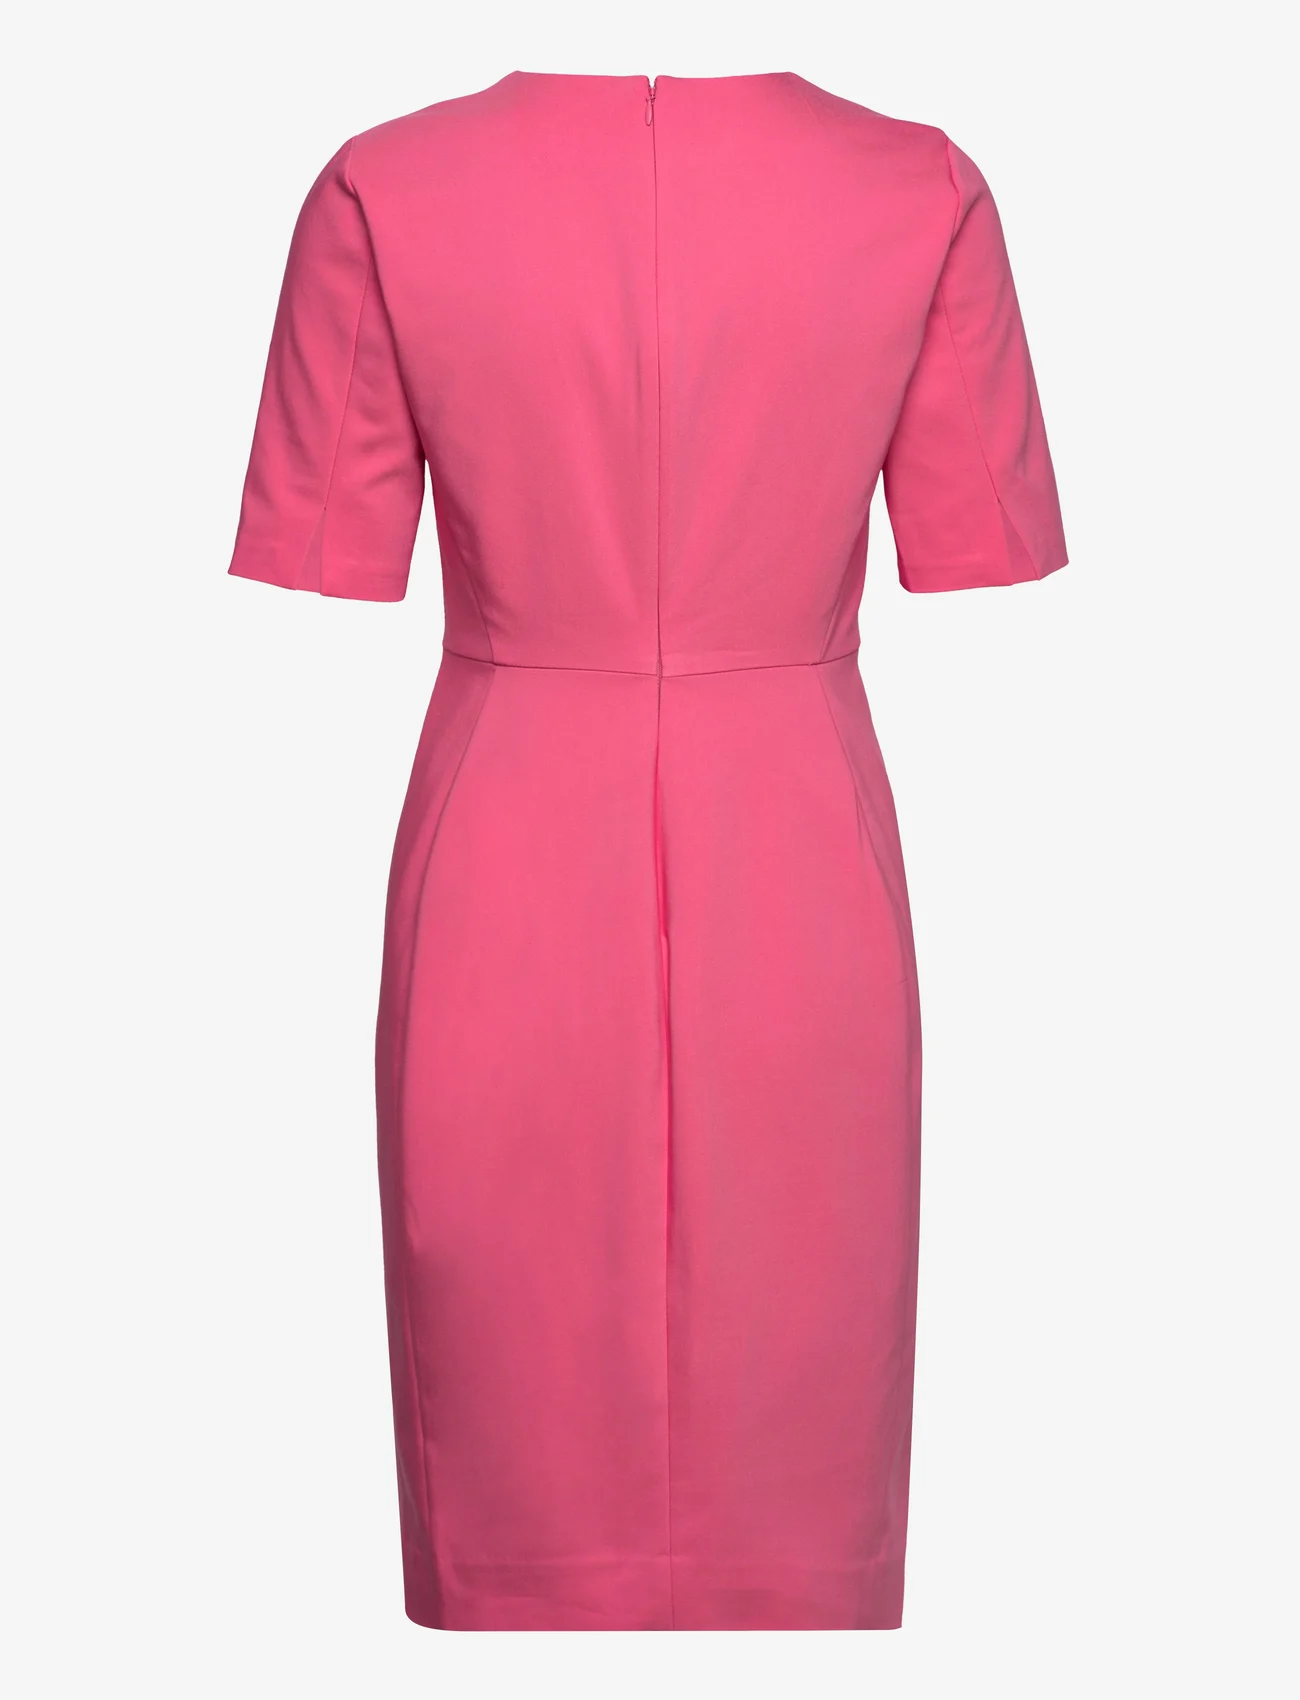 InWear - Zella Dress - party wear at outlet prices - pink rose - 1